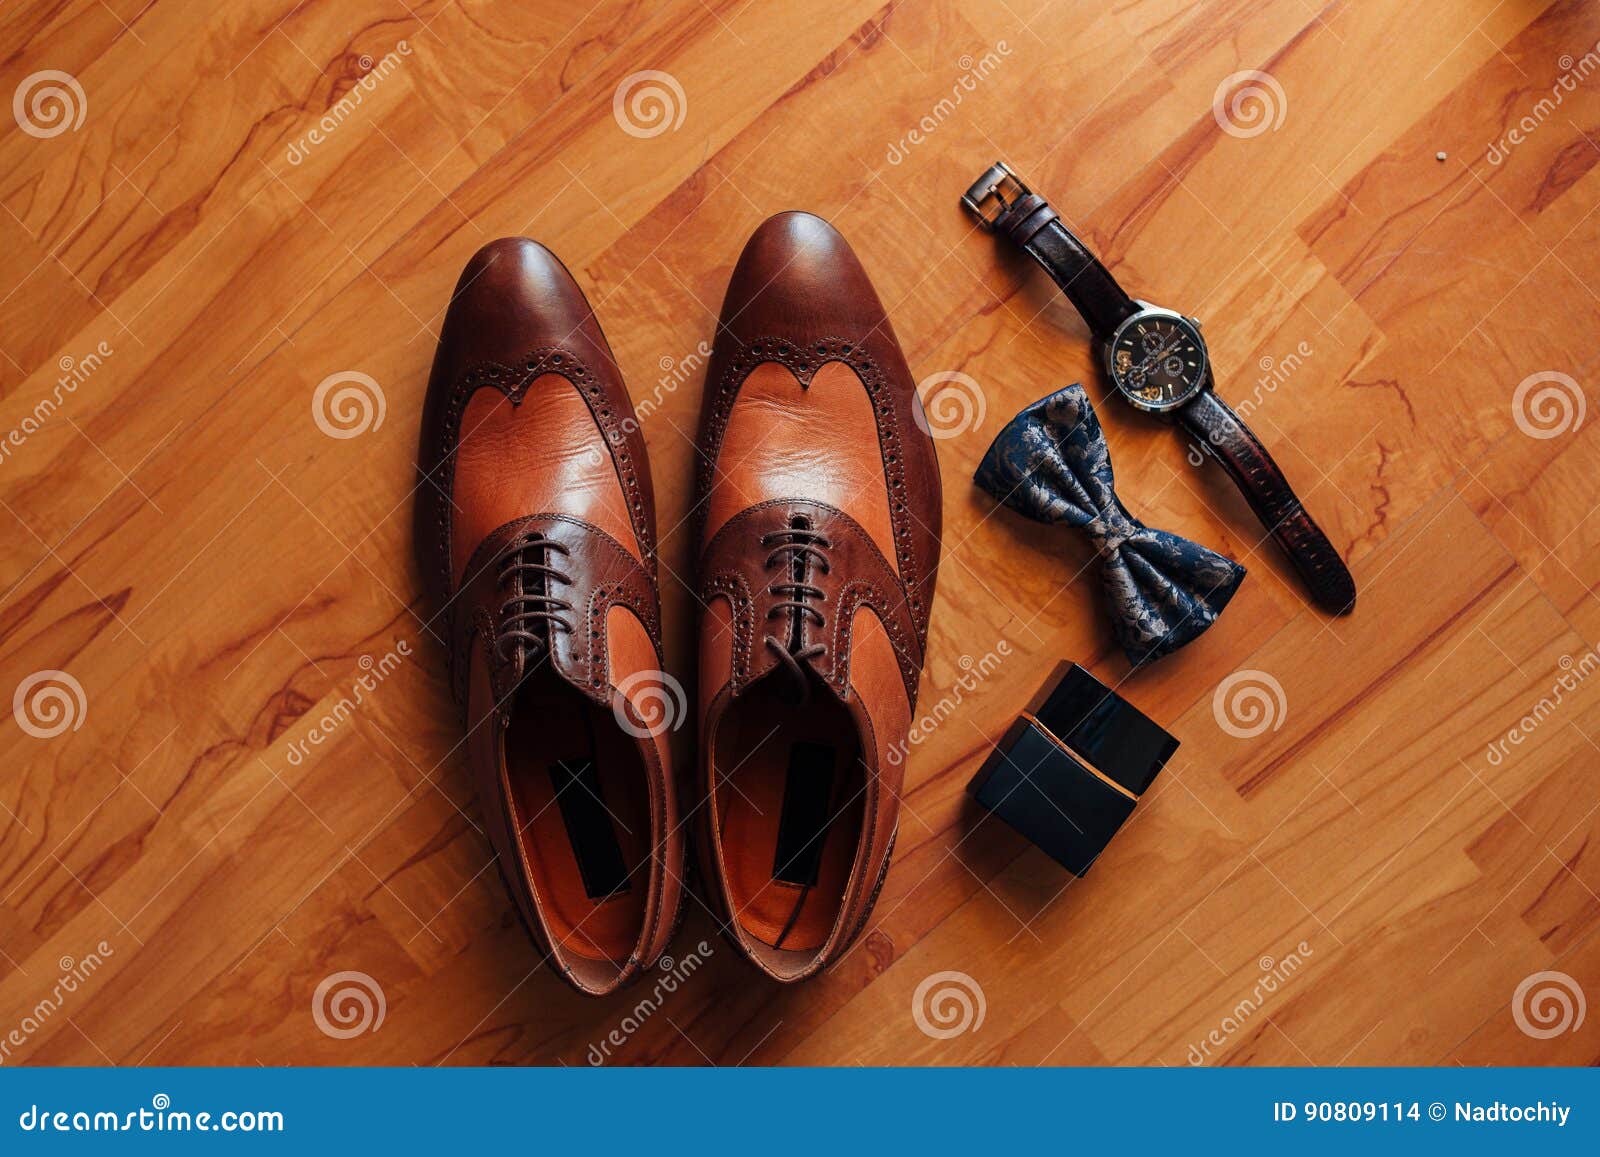 Men`s Black Shoes on the Floor Stock Photo - Image of background ...